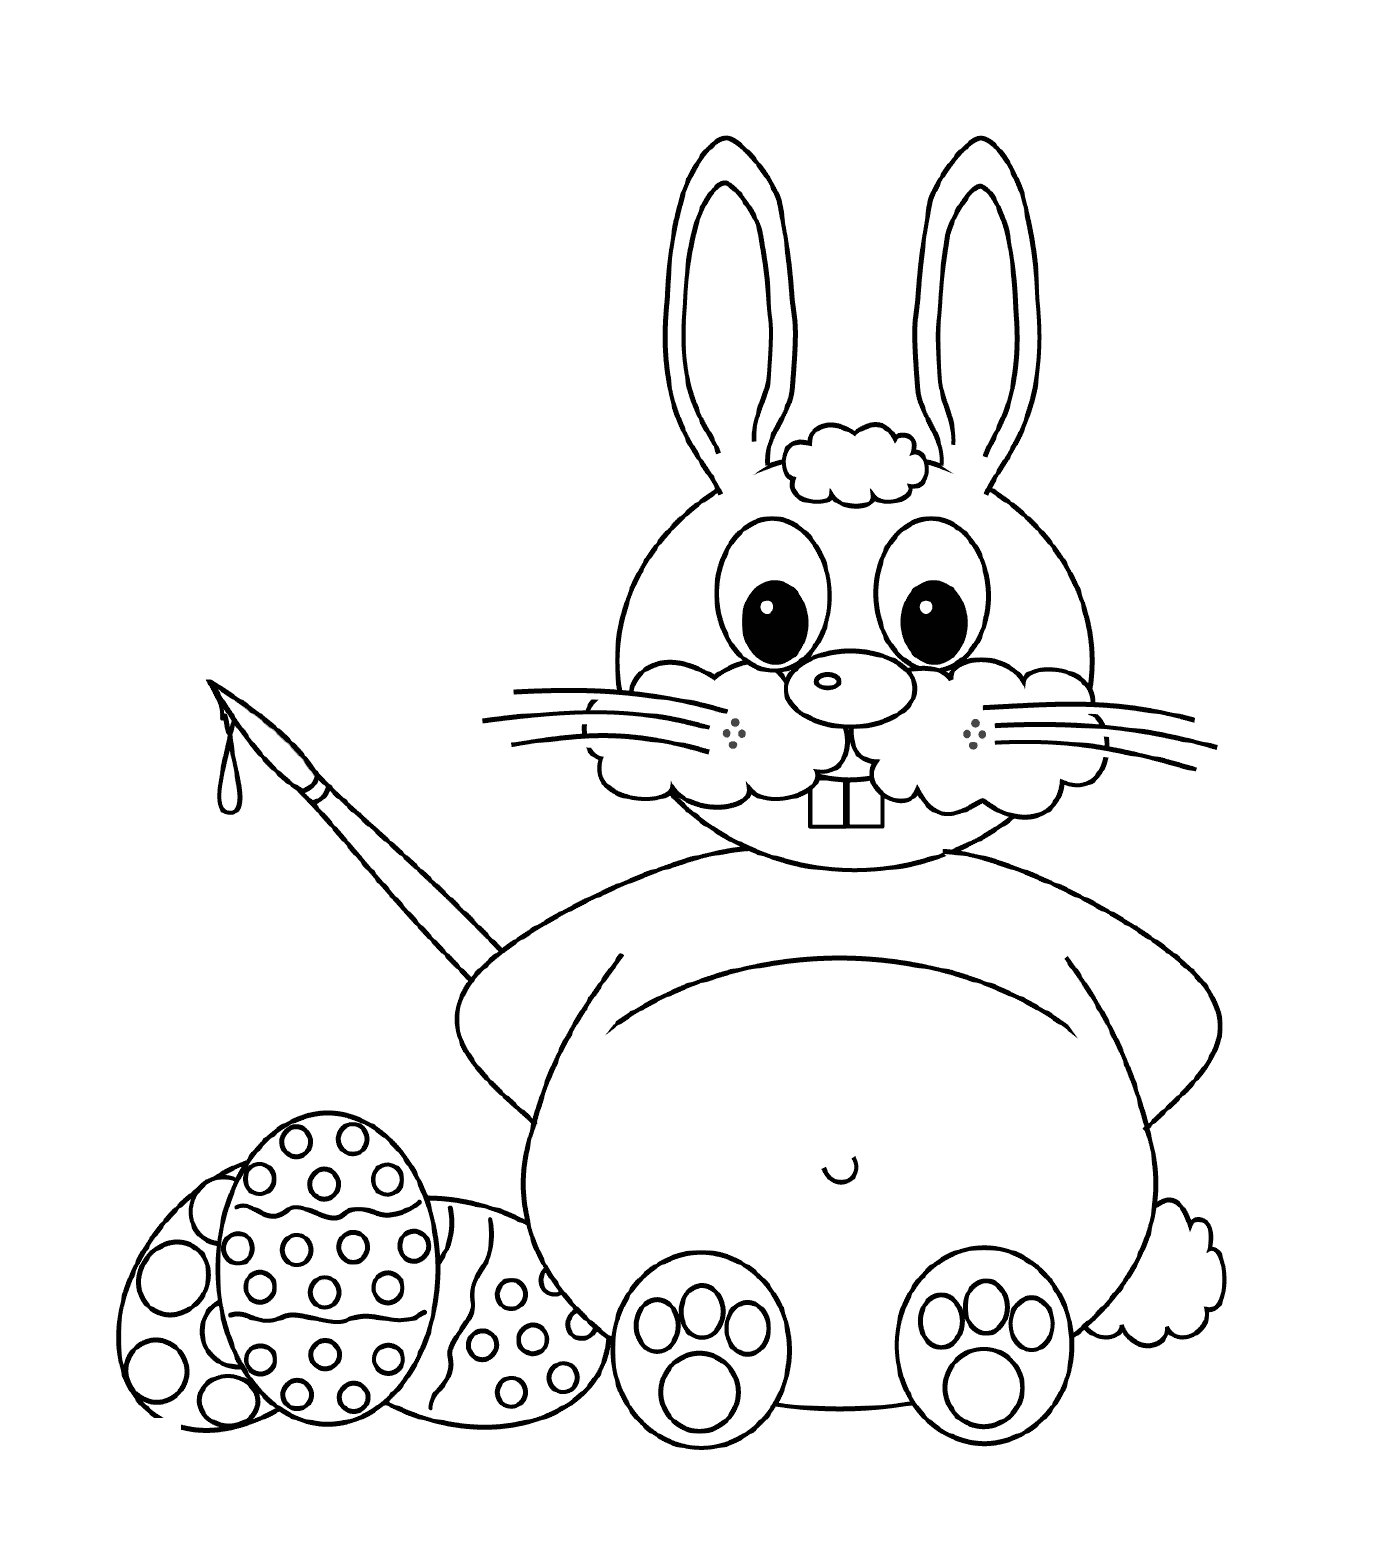  Easter Rabbit with Eggs to Paint 